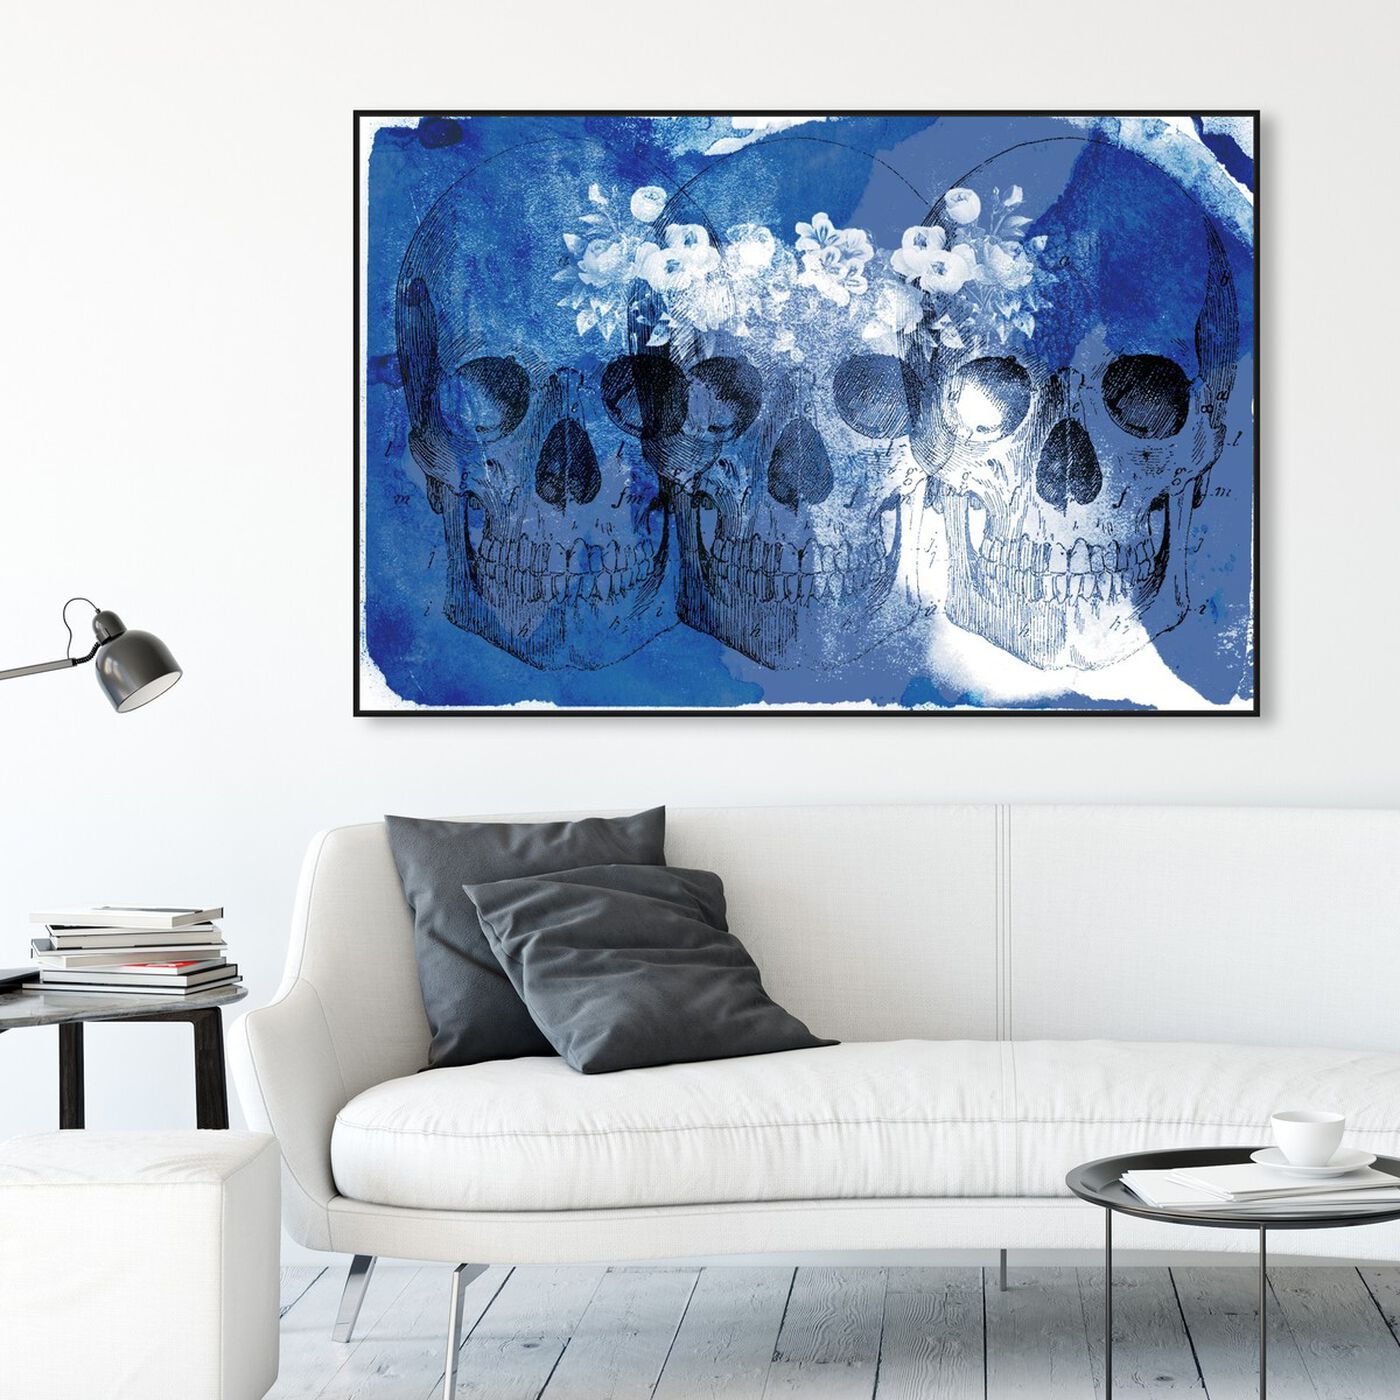 Hanging view of Blue Blossom featuring symbols and objects and skull art.